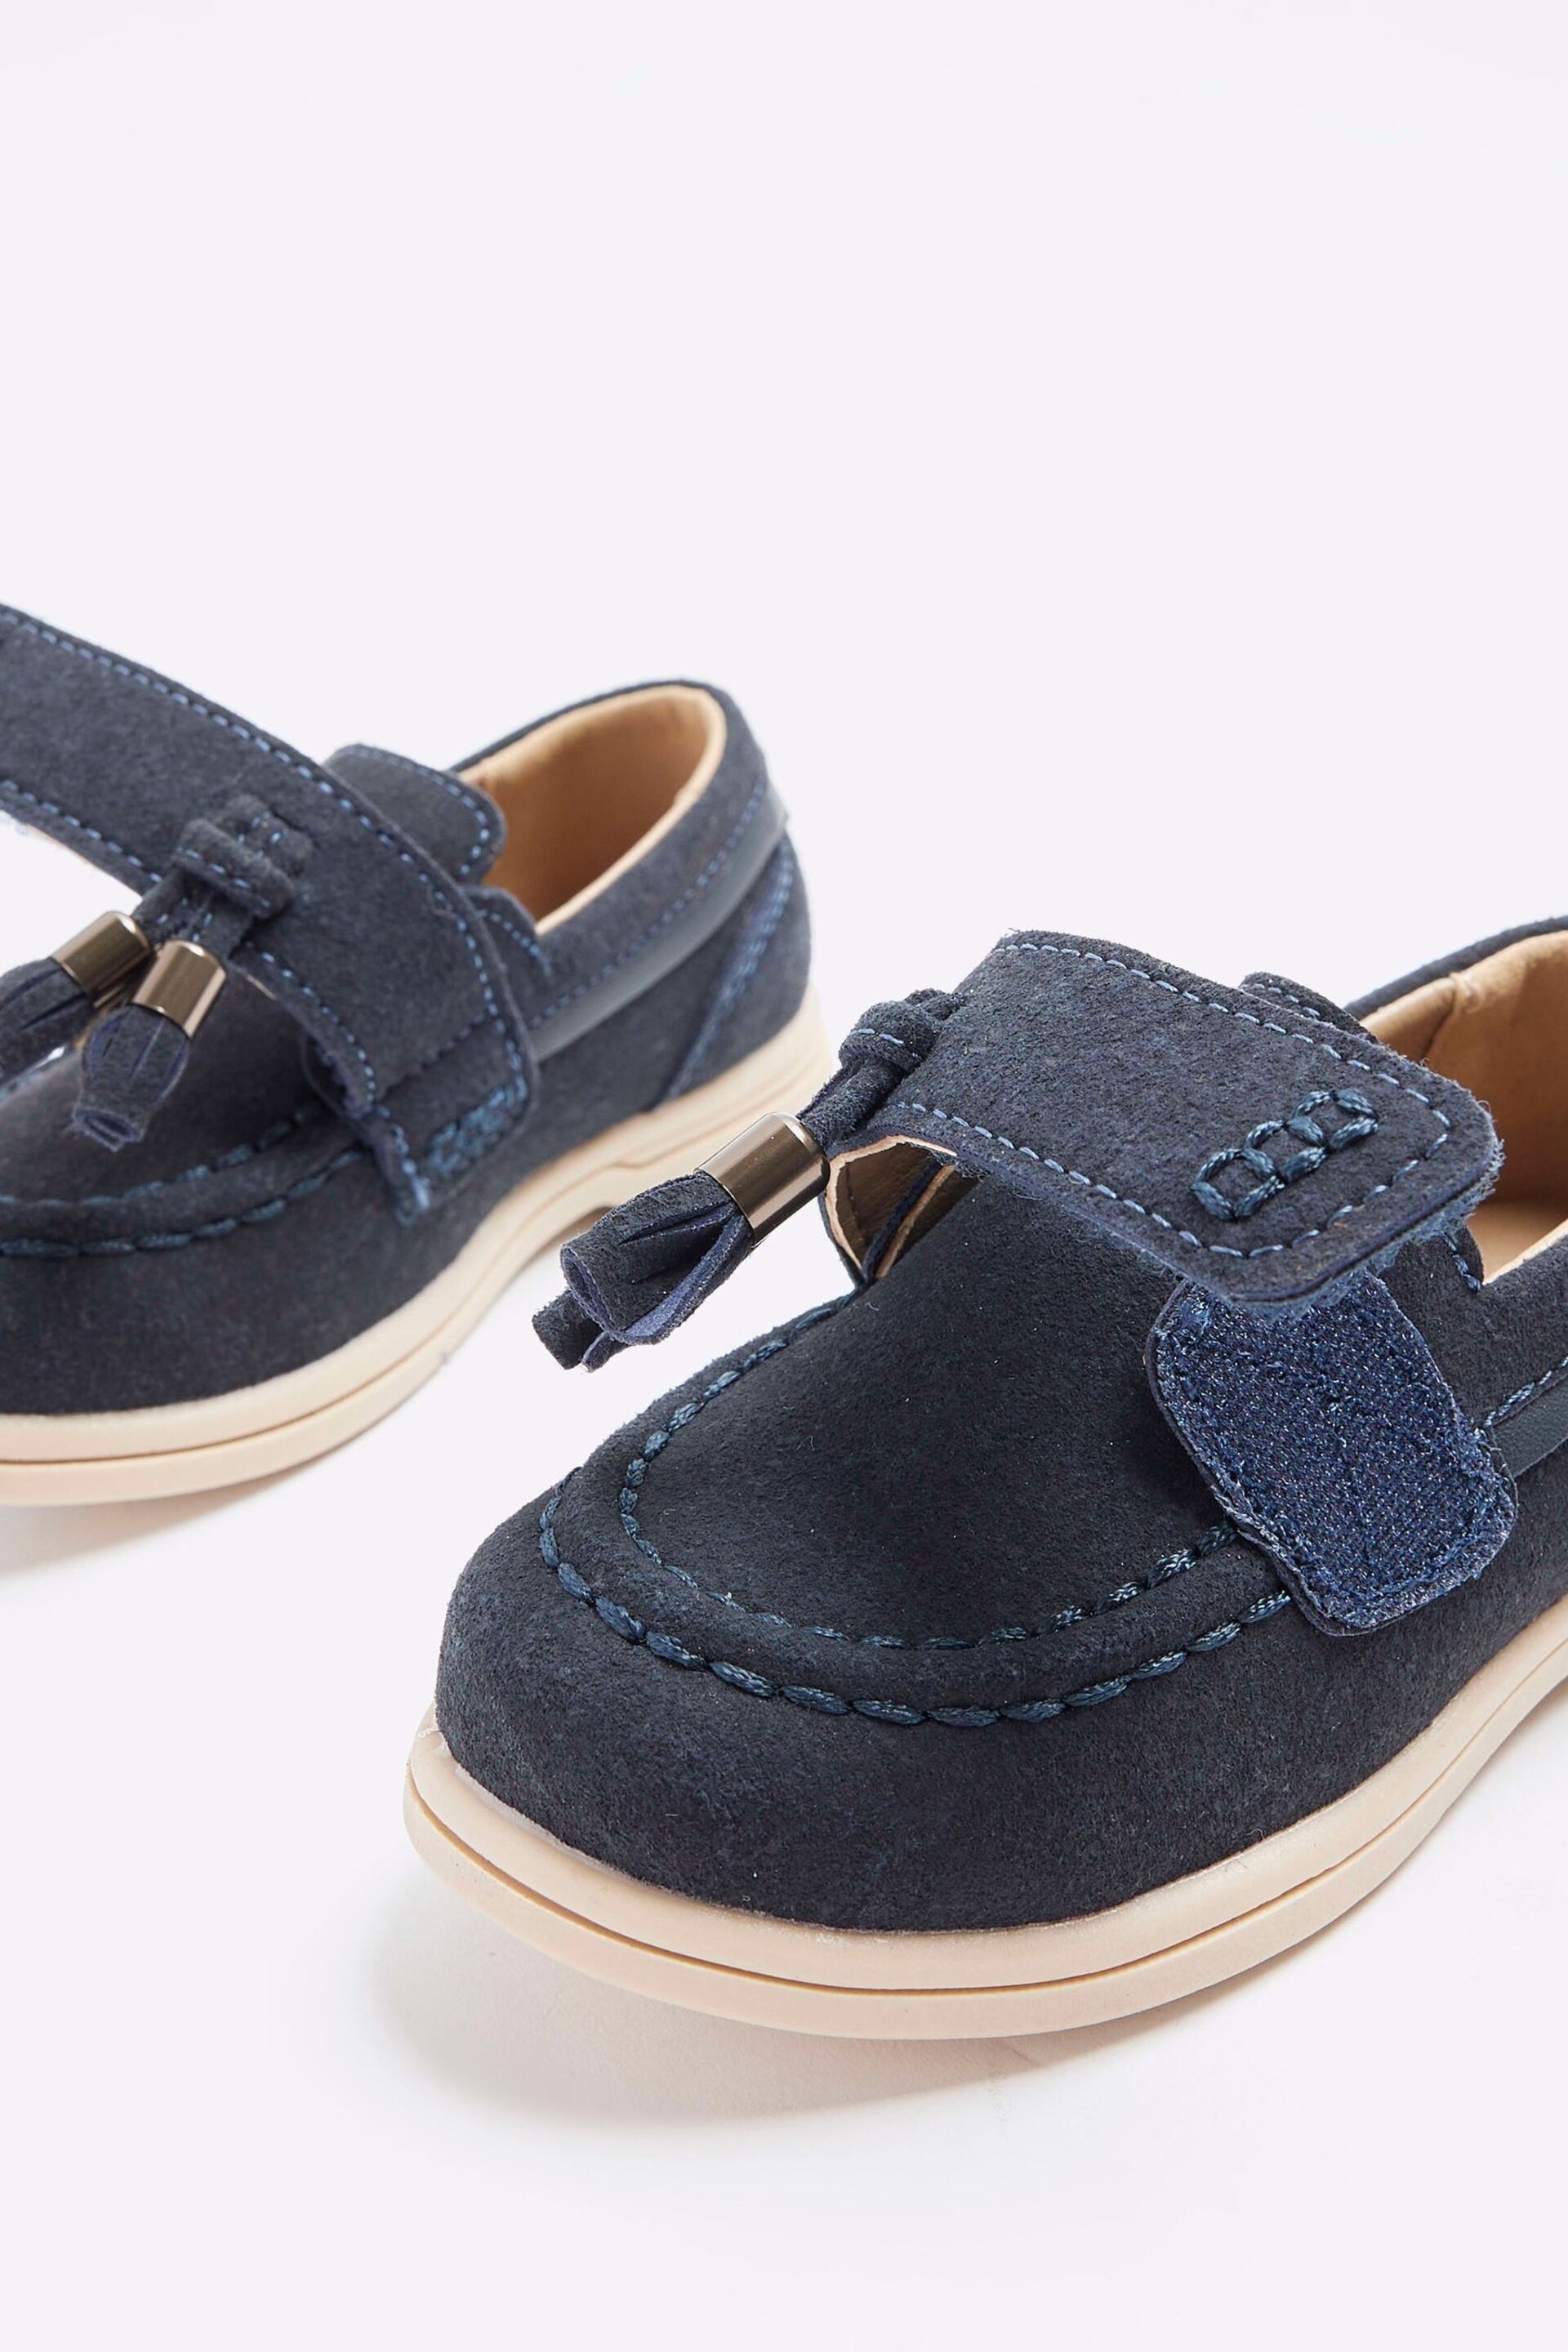 River Island Blue Boys Immy Suedette Tassel Loafers - Image 4 of 4